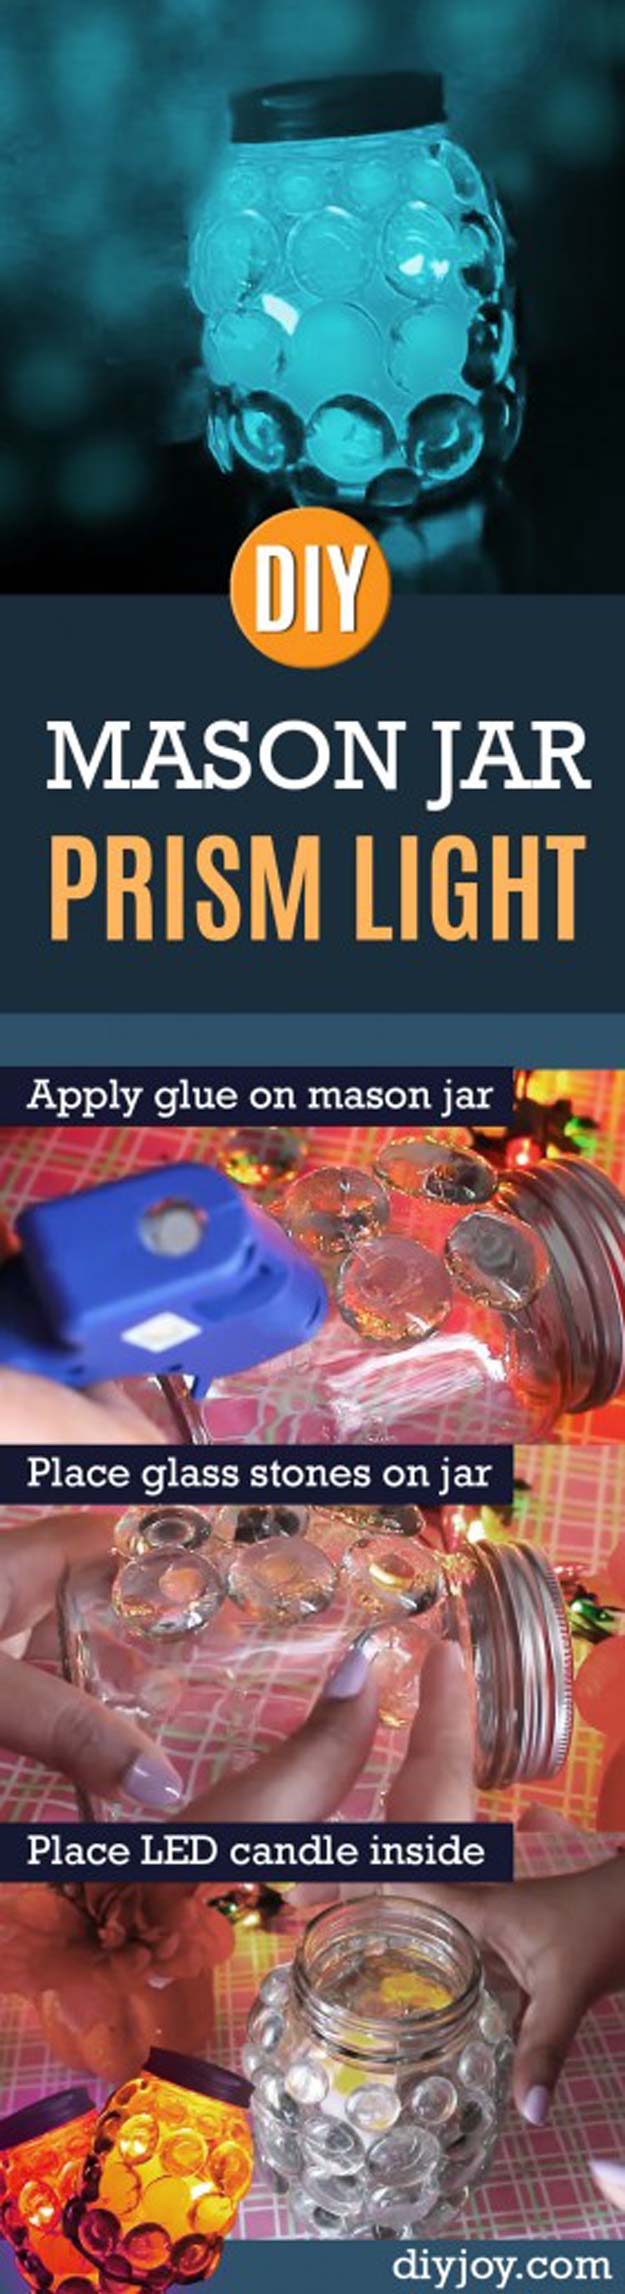 Fun Dollar Store Crafts for Teens - DIY Prism Light - Cheap and Easy DIY Ideas for Teenagers to Make for Dollar Stores - Inexpensive Gifts and Room Decor for Tweens, Boys and Girls - Awesome Step by Step Tutorials with Instructions for Cool DIY Projects 